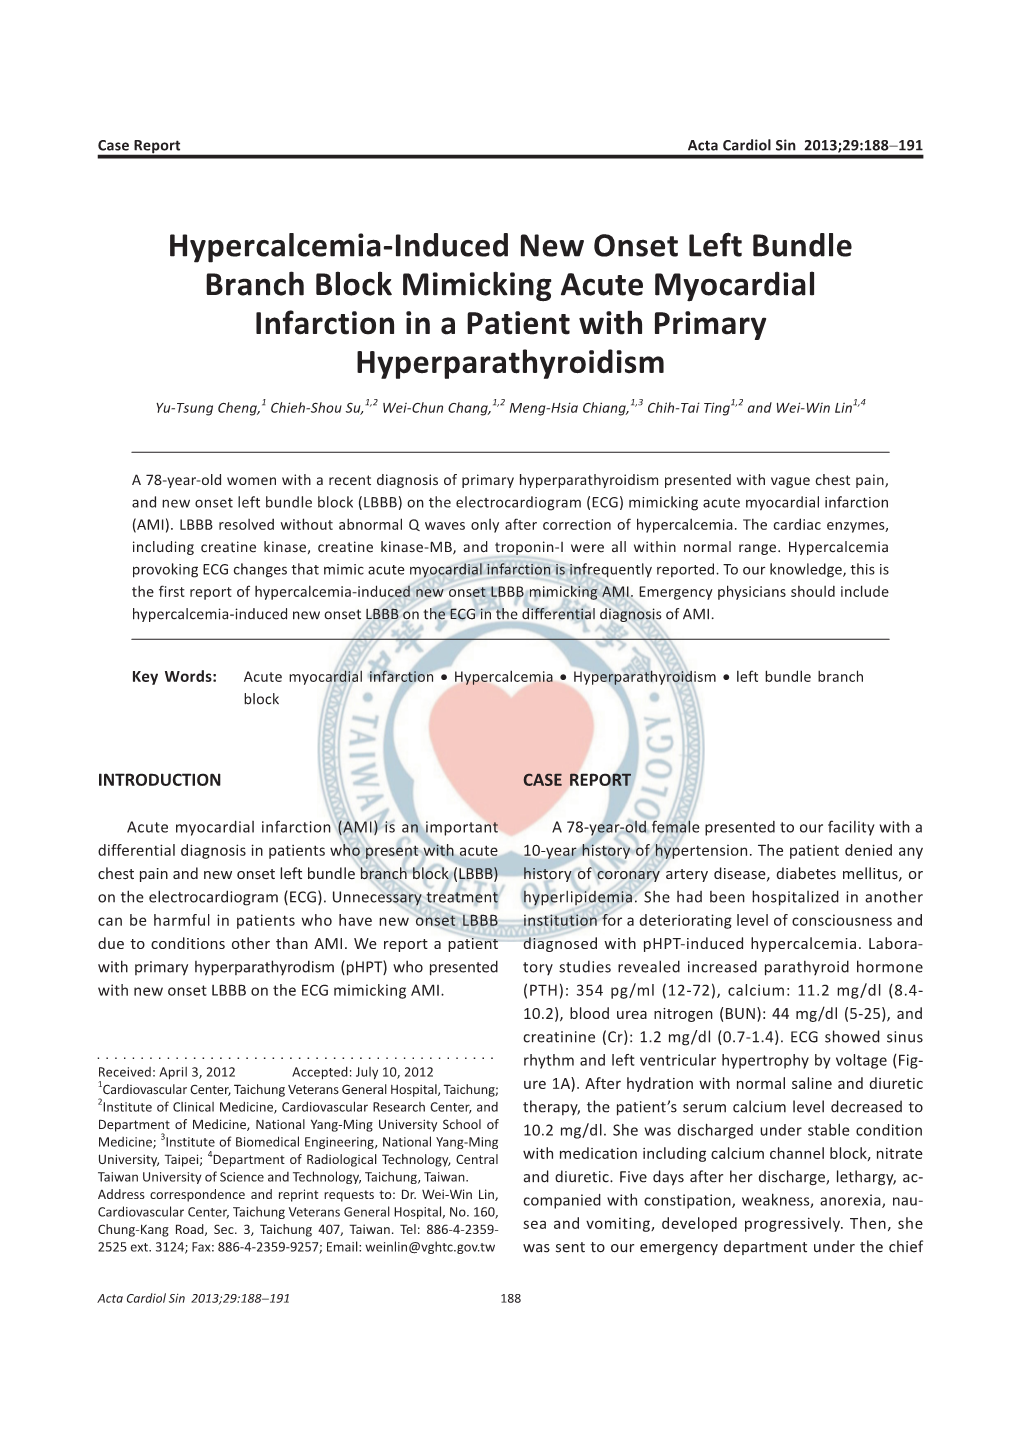 Hypercalcemia-Induced New Onset Left Bundle Branch Block Mimicking Acute Myocardial Infarction in a Patient with Primary Hyperparathyroidism